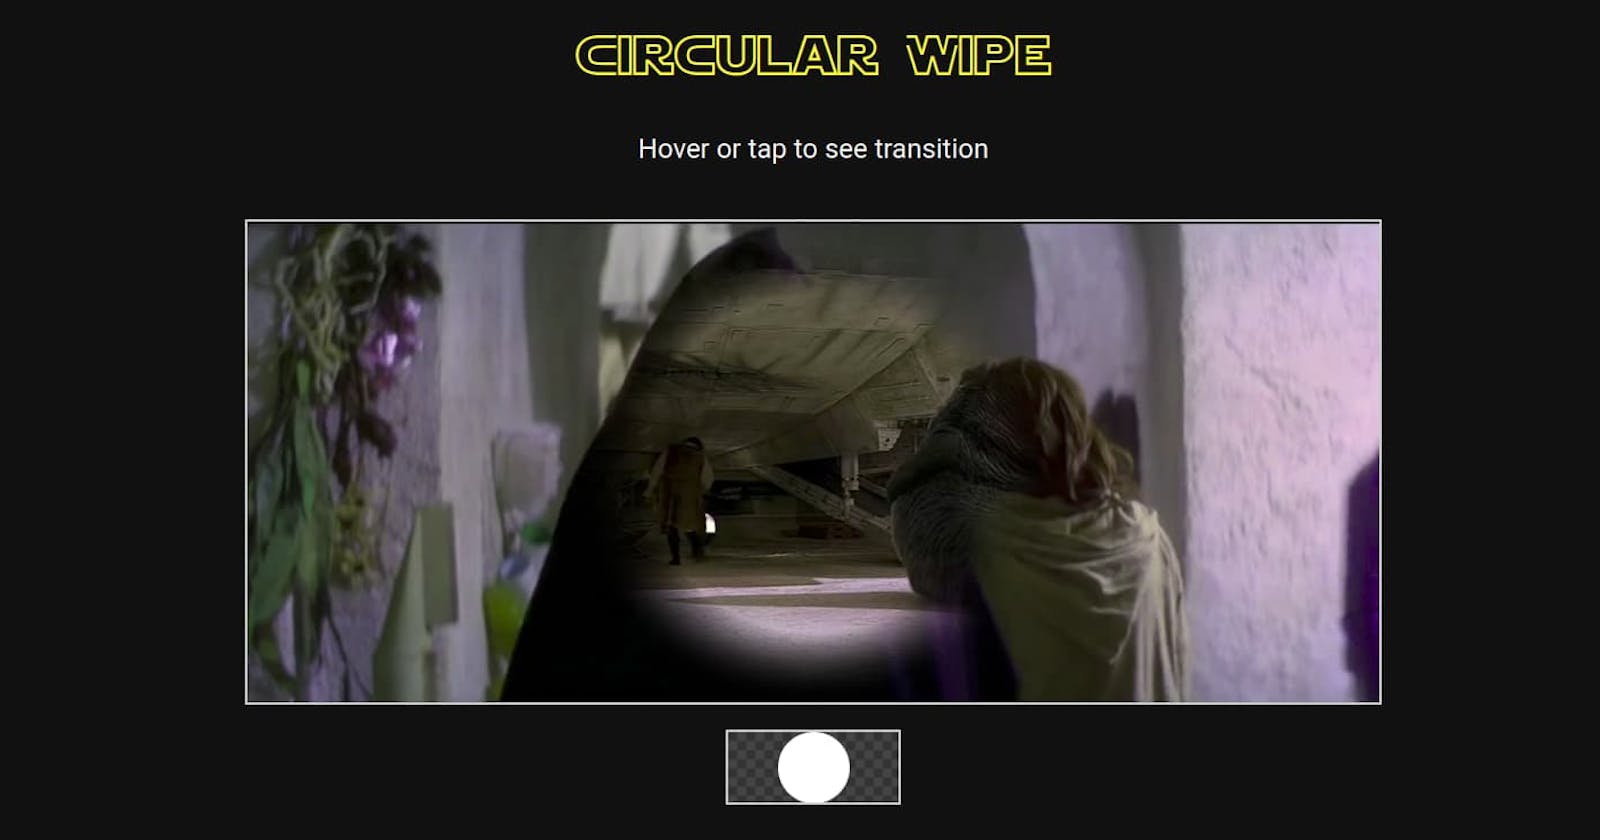 An awesome, cross-browser Star Wars circular wipe transition? CSS houdini vs clippath vs mask